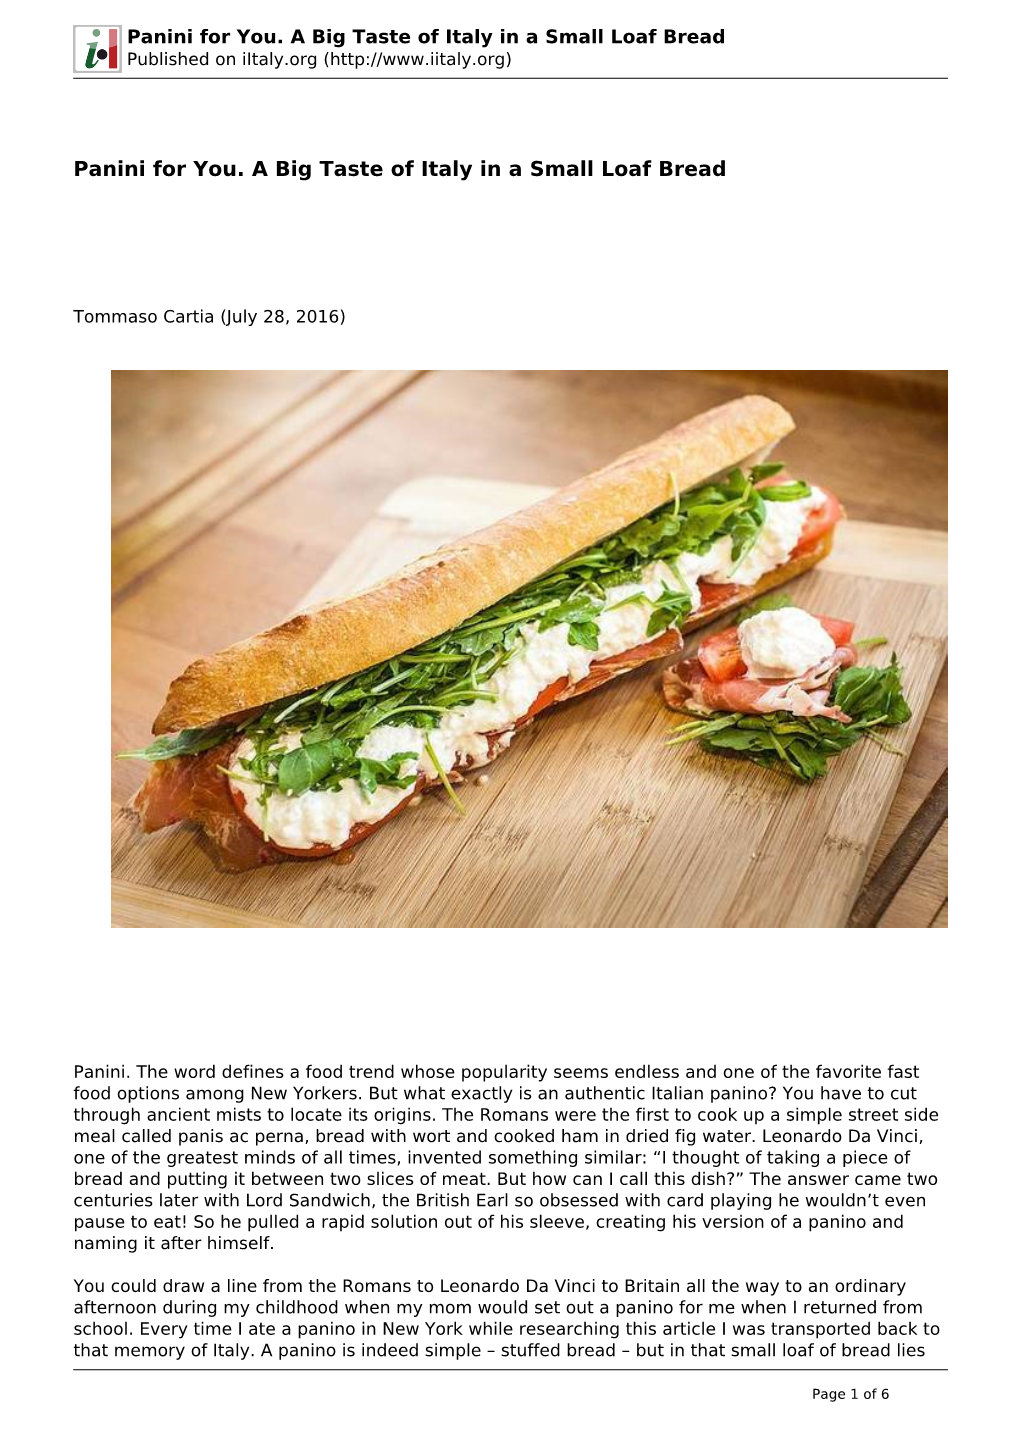 Panini for You. a Big Taste of Italy in a Small Loaf Bread Published on Iitaly.Org (